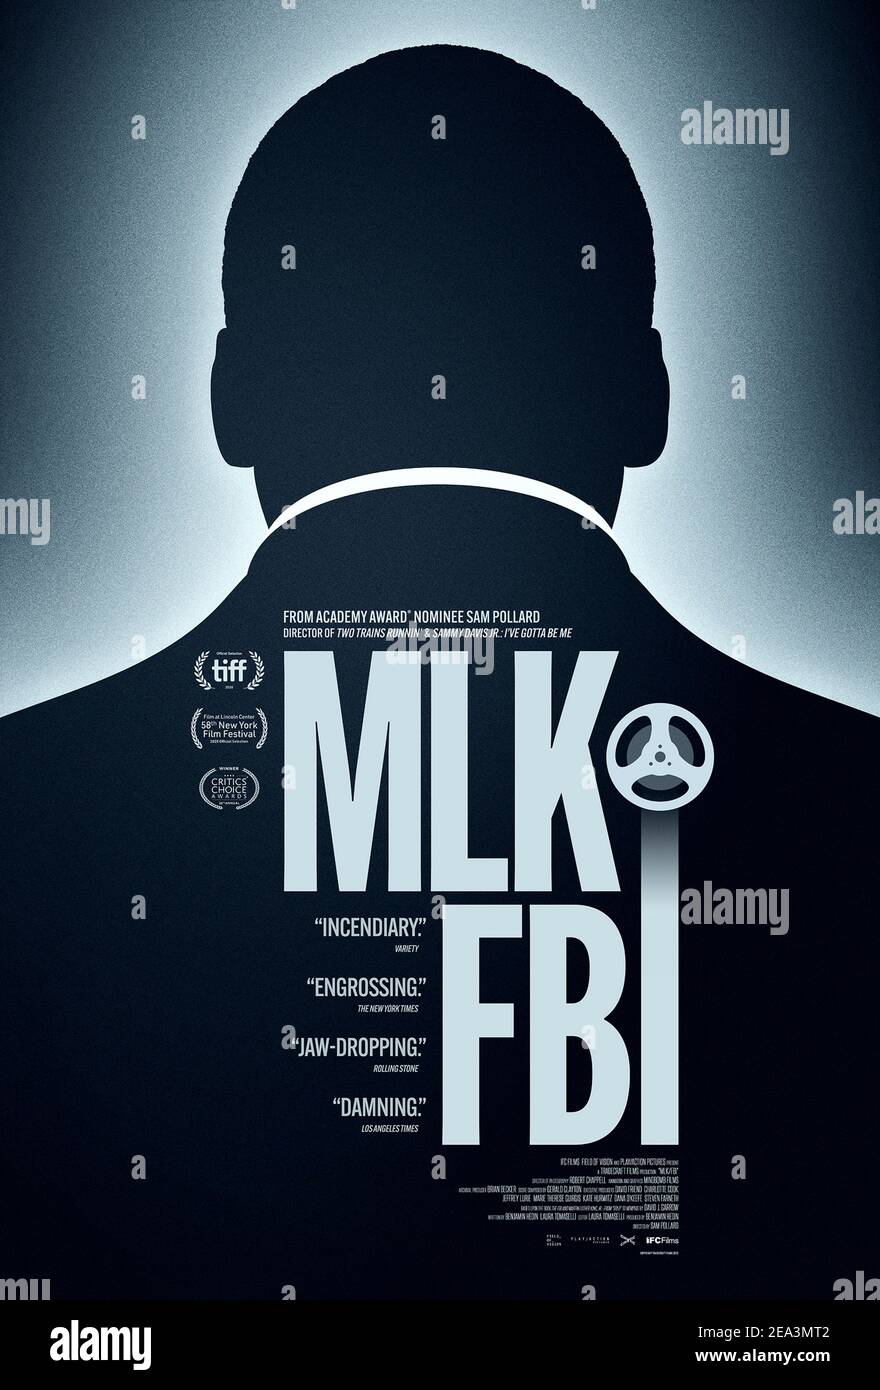 MLK/FBI (2020) directed by Sam Pollard and starring David Garrow, Clarence B. Jones and Charles Knox. Based on newly declassified files, Sam Pollard's resonant film explores the US government's surveillance and harassment of Martin Luther King, Jr. Stock Photo